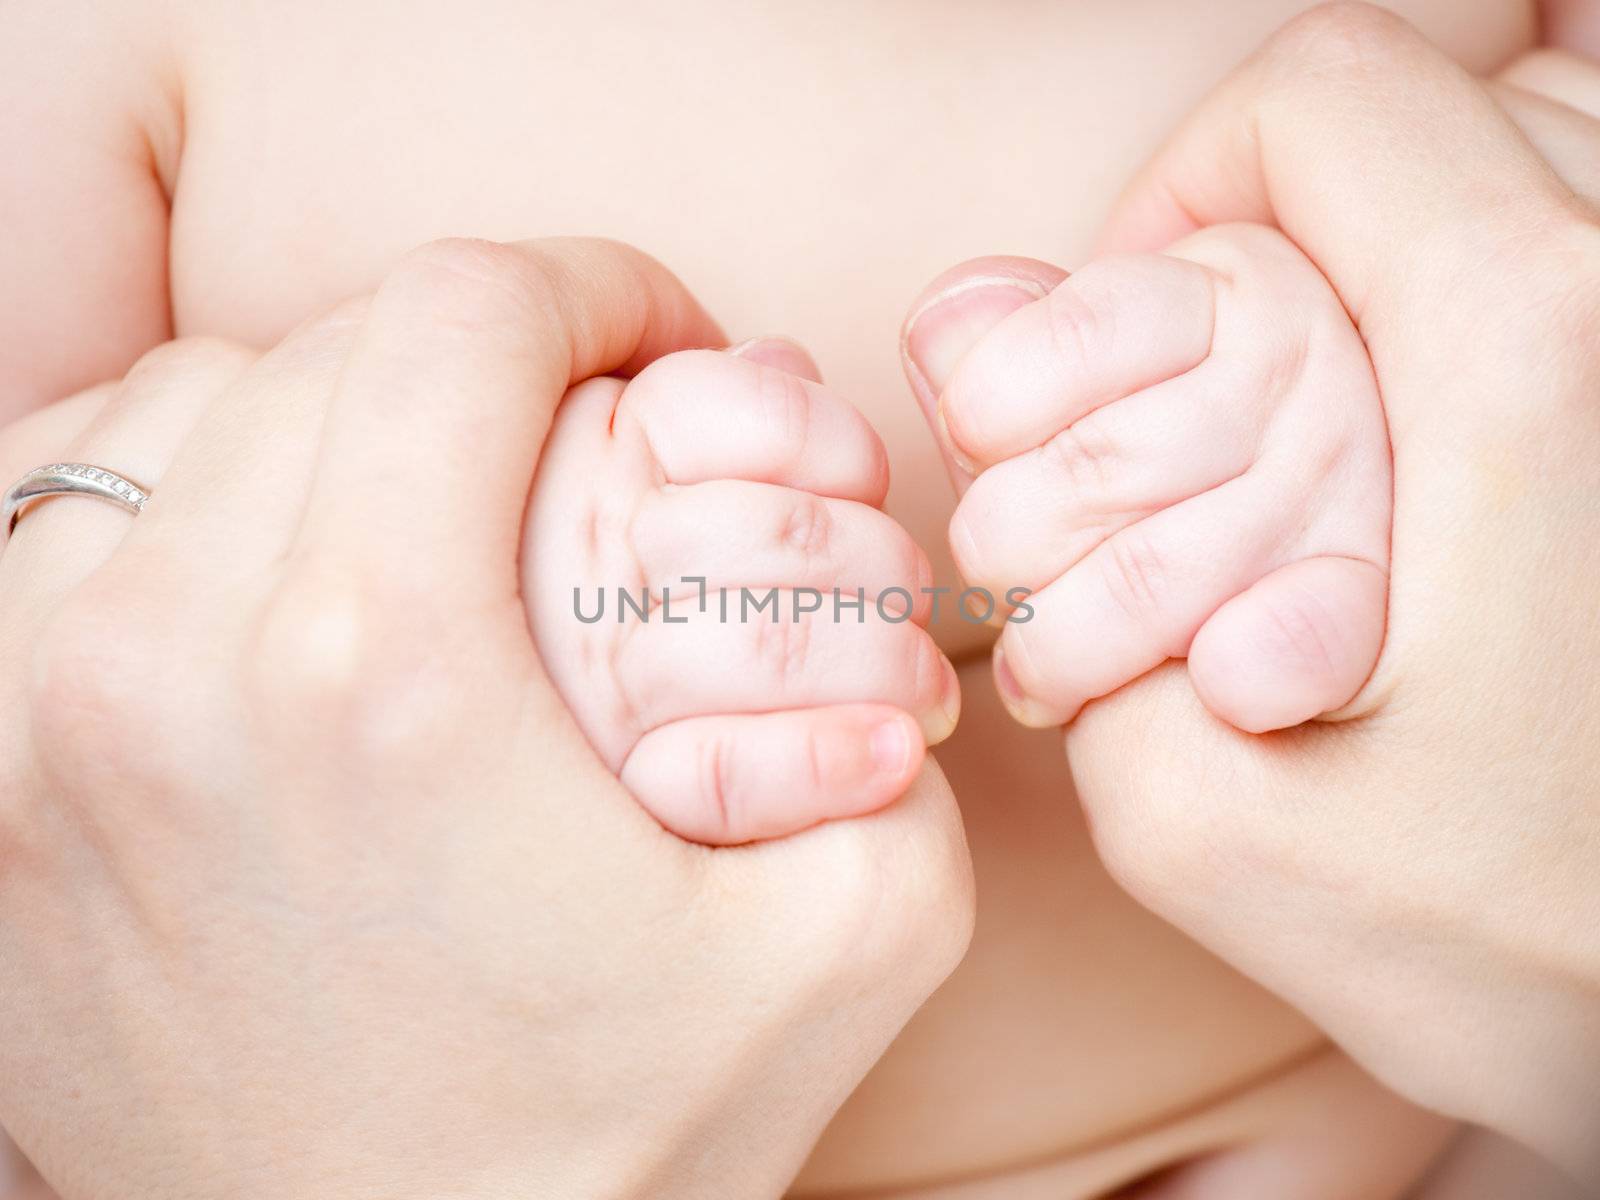 Infant holding mother's hands, shallow focus